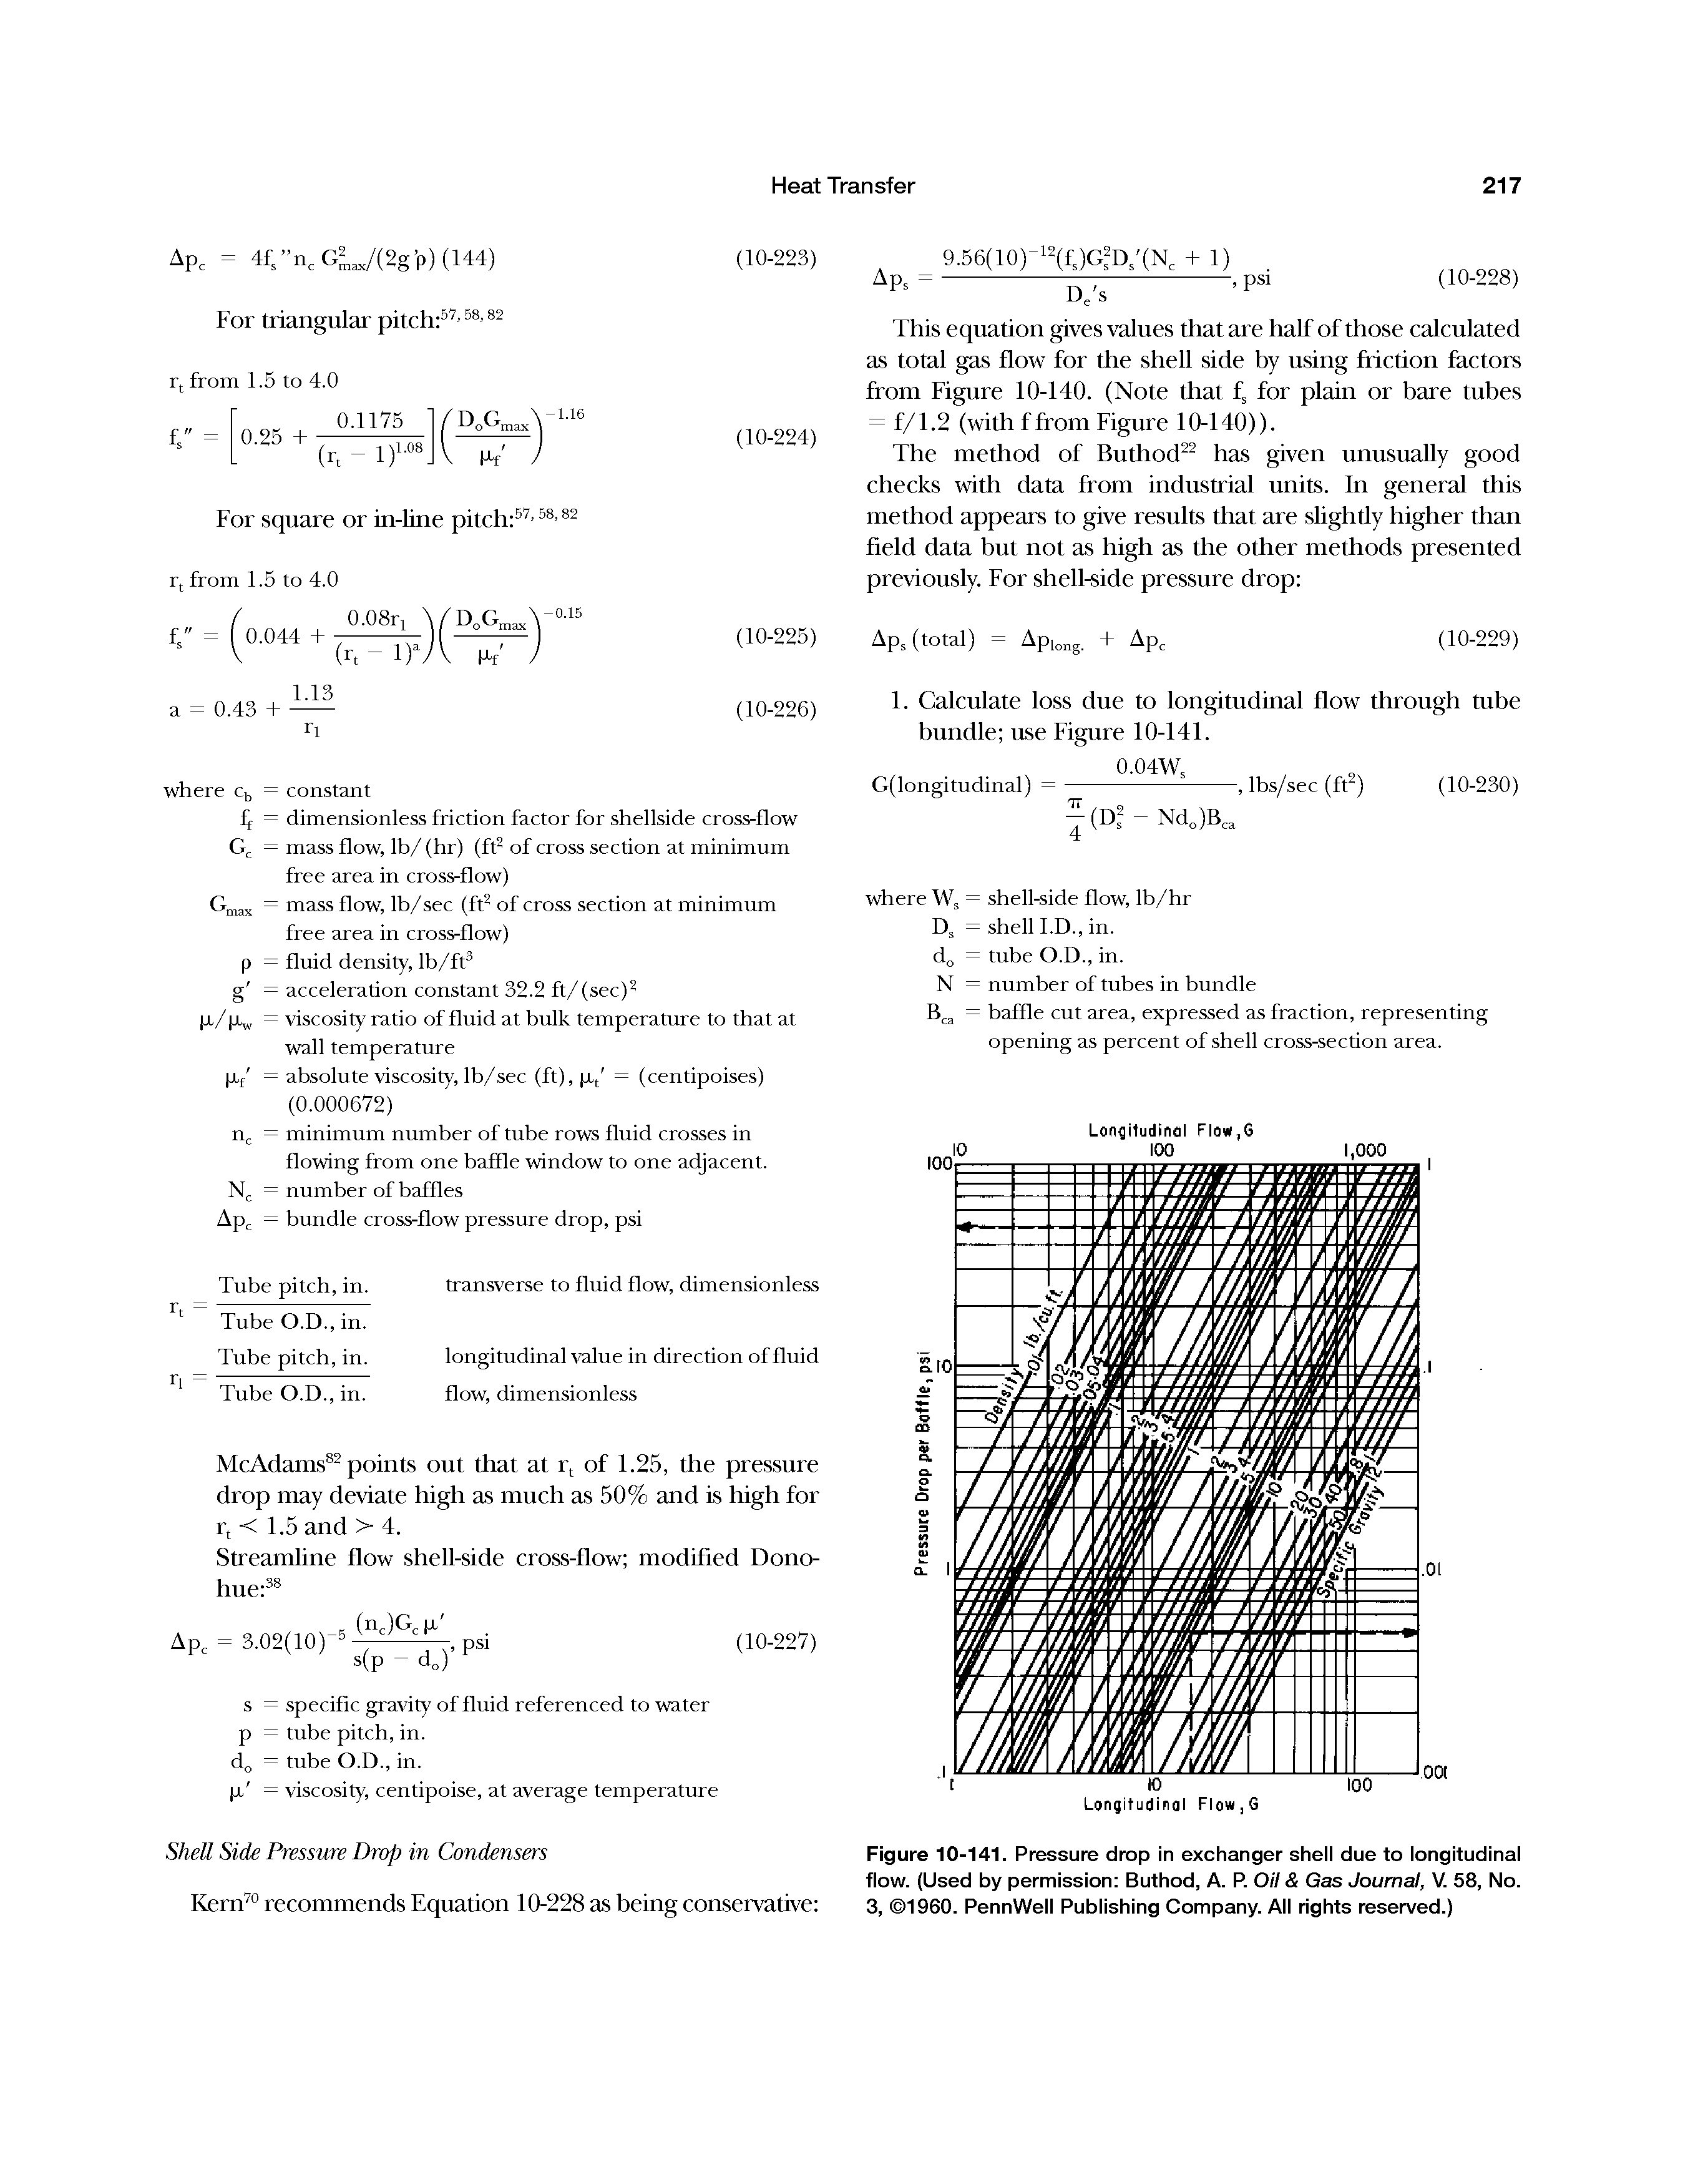 Figure 10-141. Pressure drop in exchanger shell due to longitudinal flow. (Used by permission Buthod, A. P. Oil Gas Journal, V. 58, No. 3, 1960. PennWell Publishing Company. All rights reserved.)...